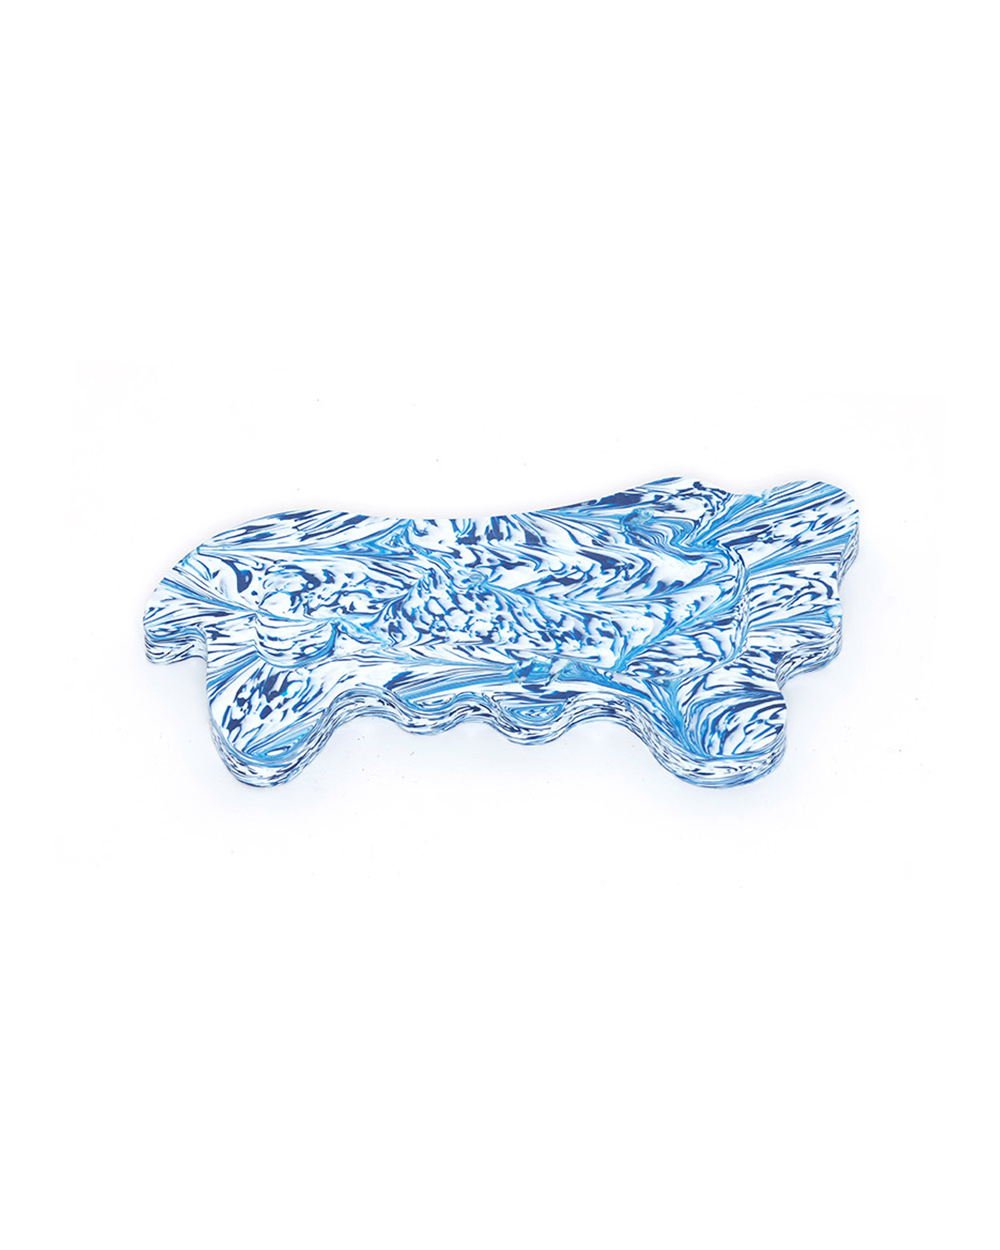 Melted Structures Desk Tray - Blue Wave